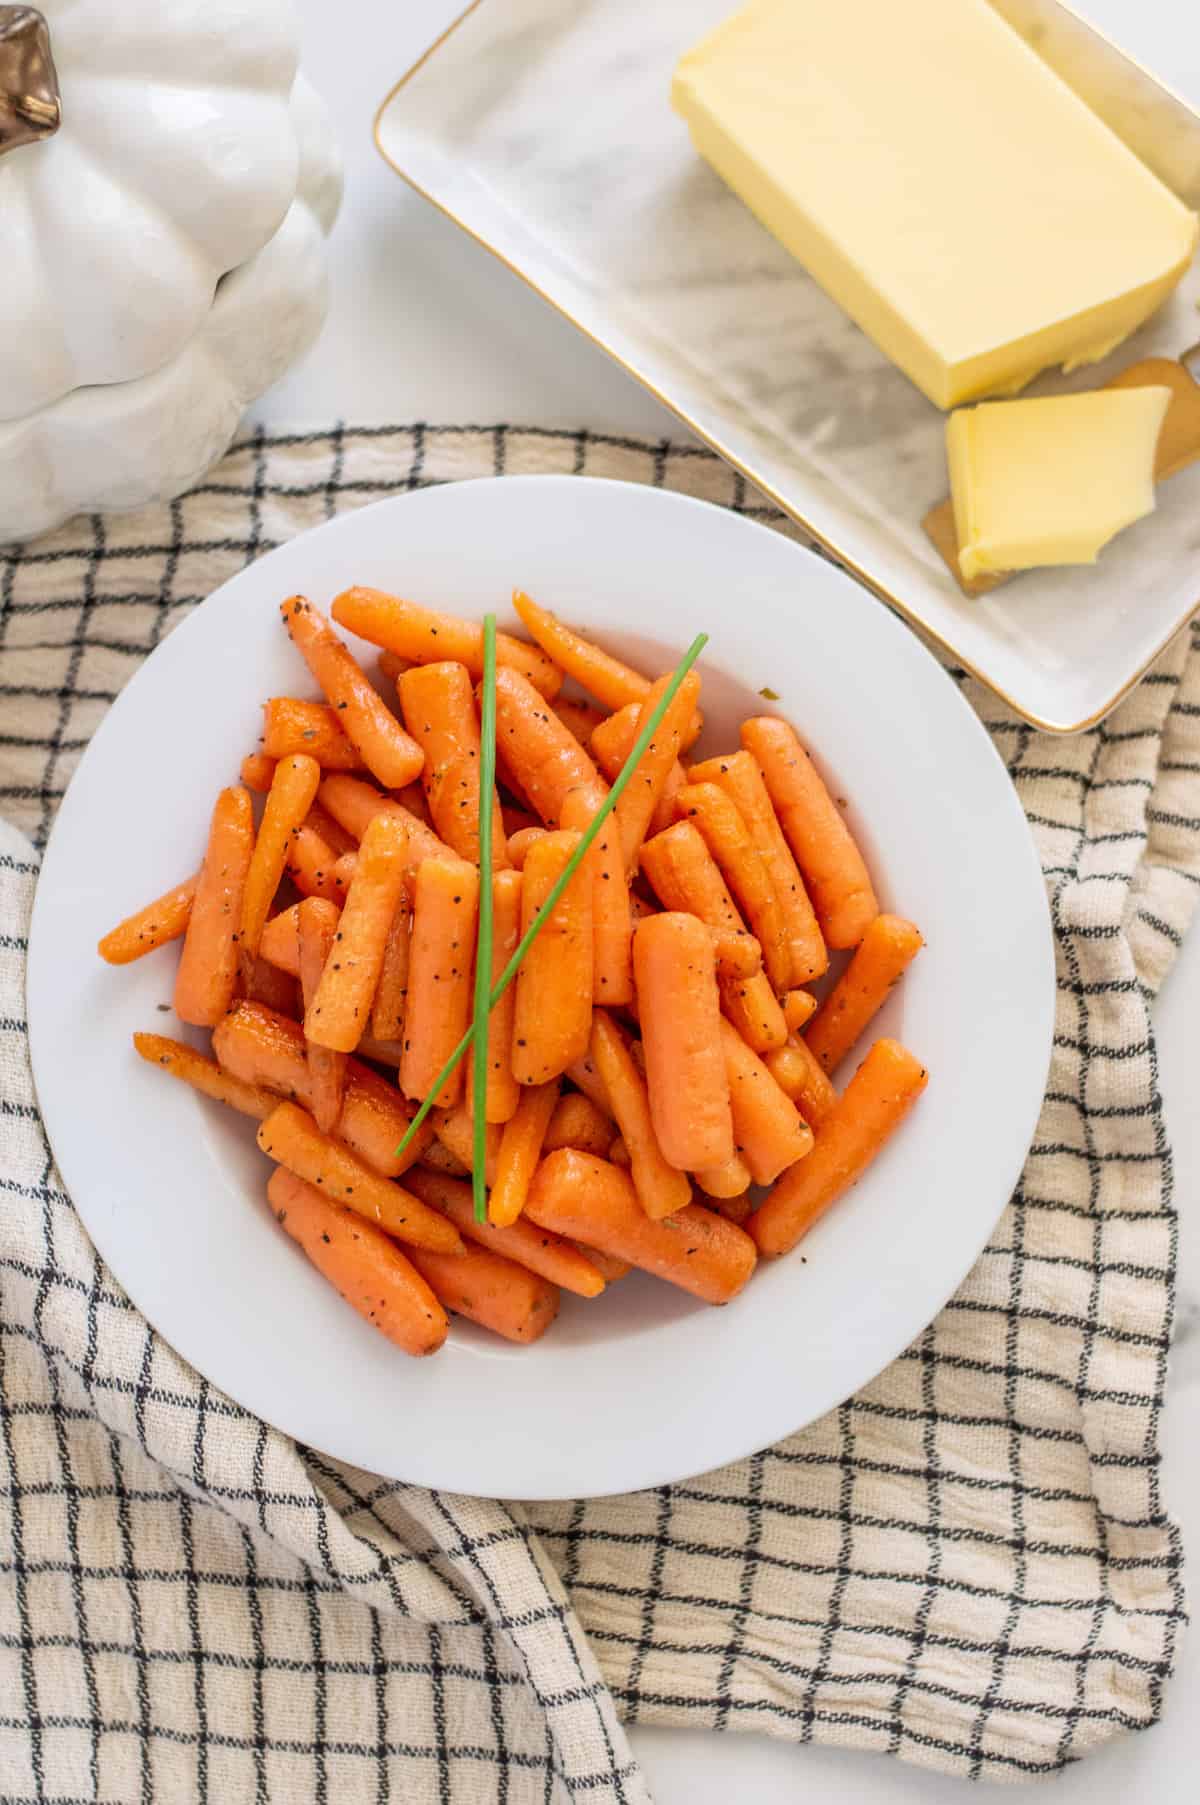 Baby carrots in a white bowl with checkered towel